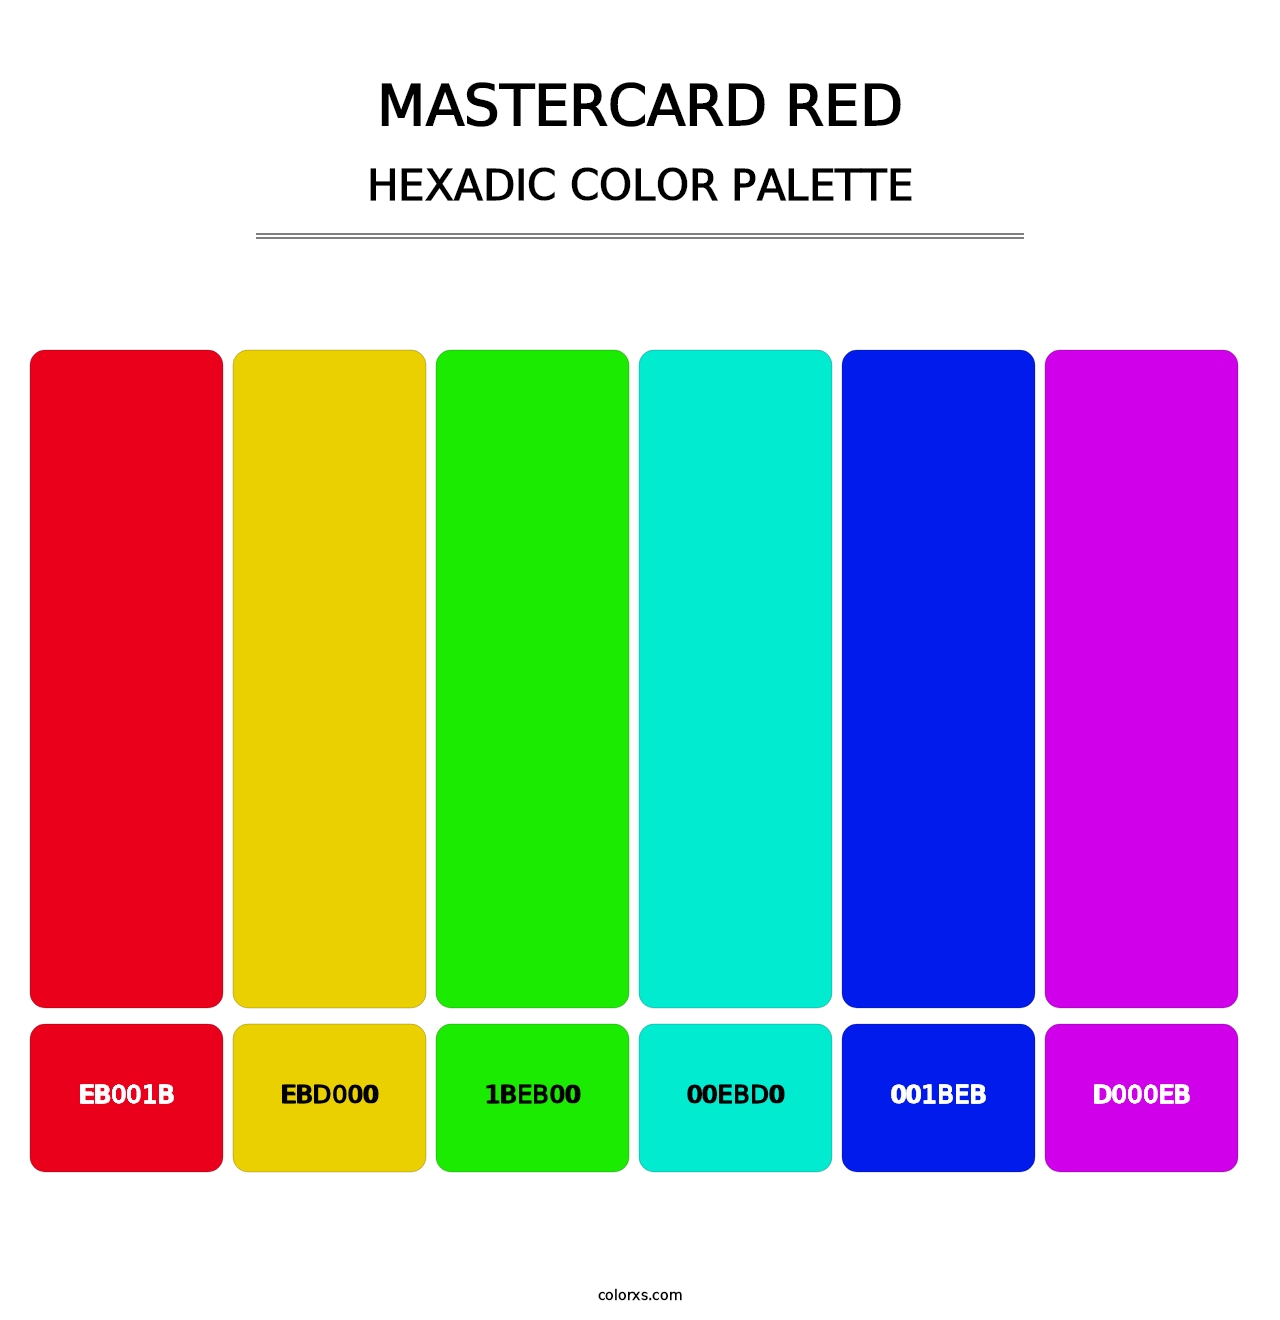 Mastercard Red - Hexadic Color Palette